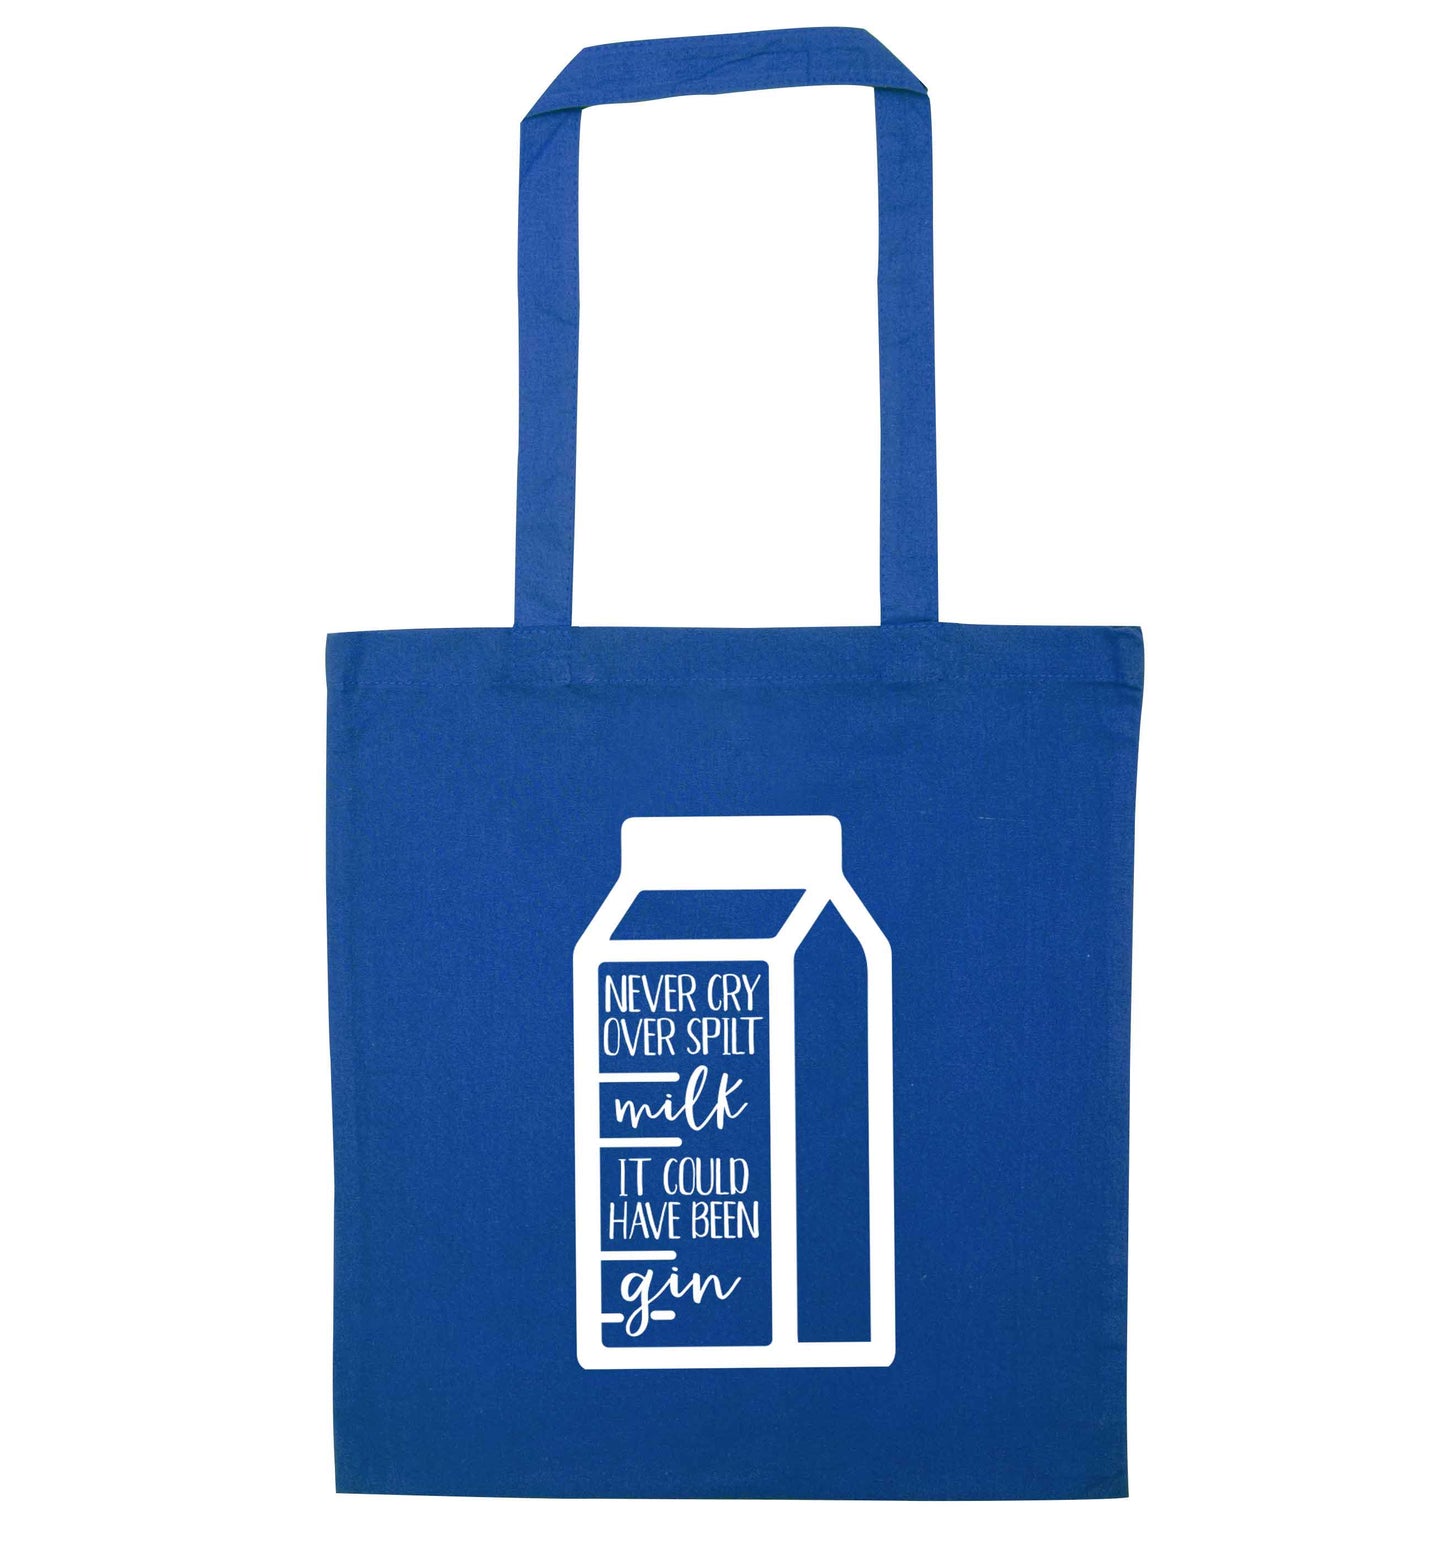 Never cry over spilt milk, it could have been gin blue tote bag